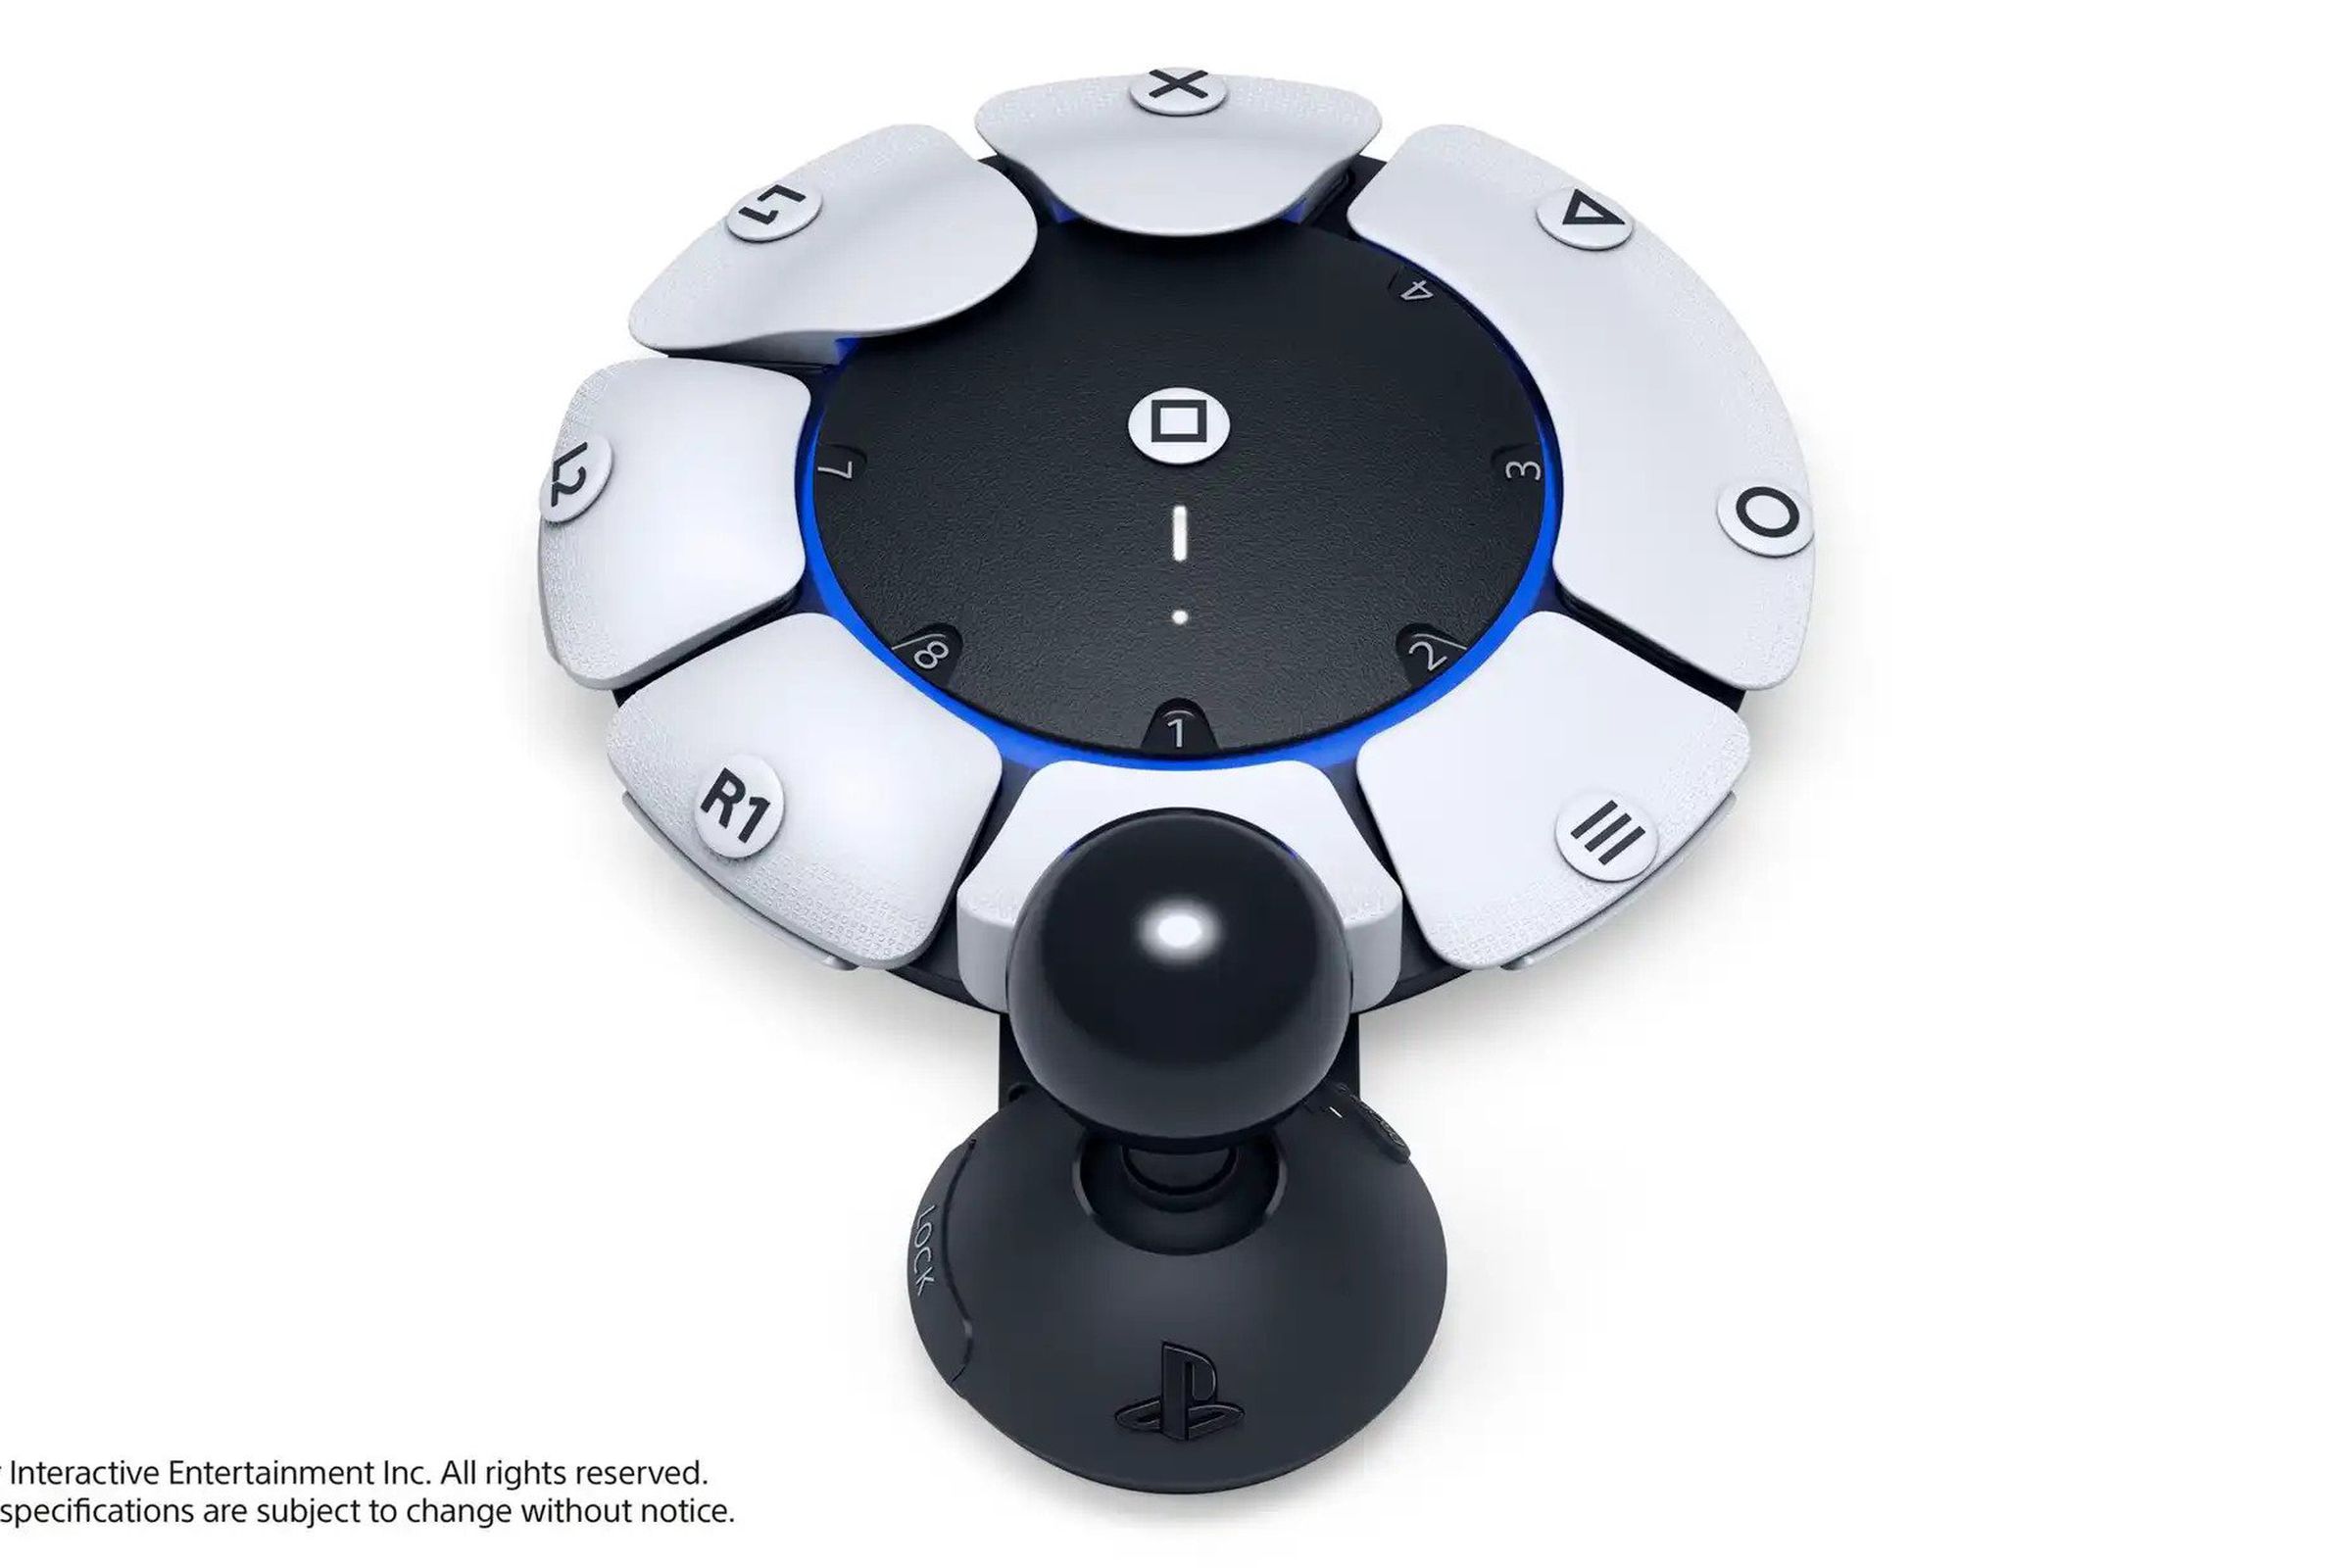 Image of PlayStation 5 accessibility controller prototype Leonard featuring a white circular gamepad flanked by a black joystick